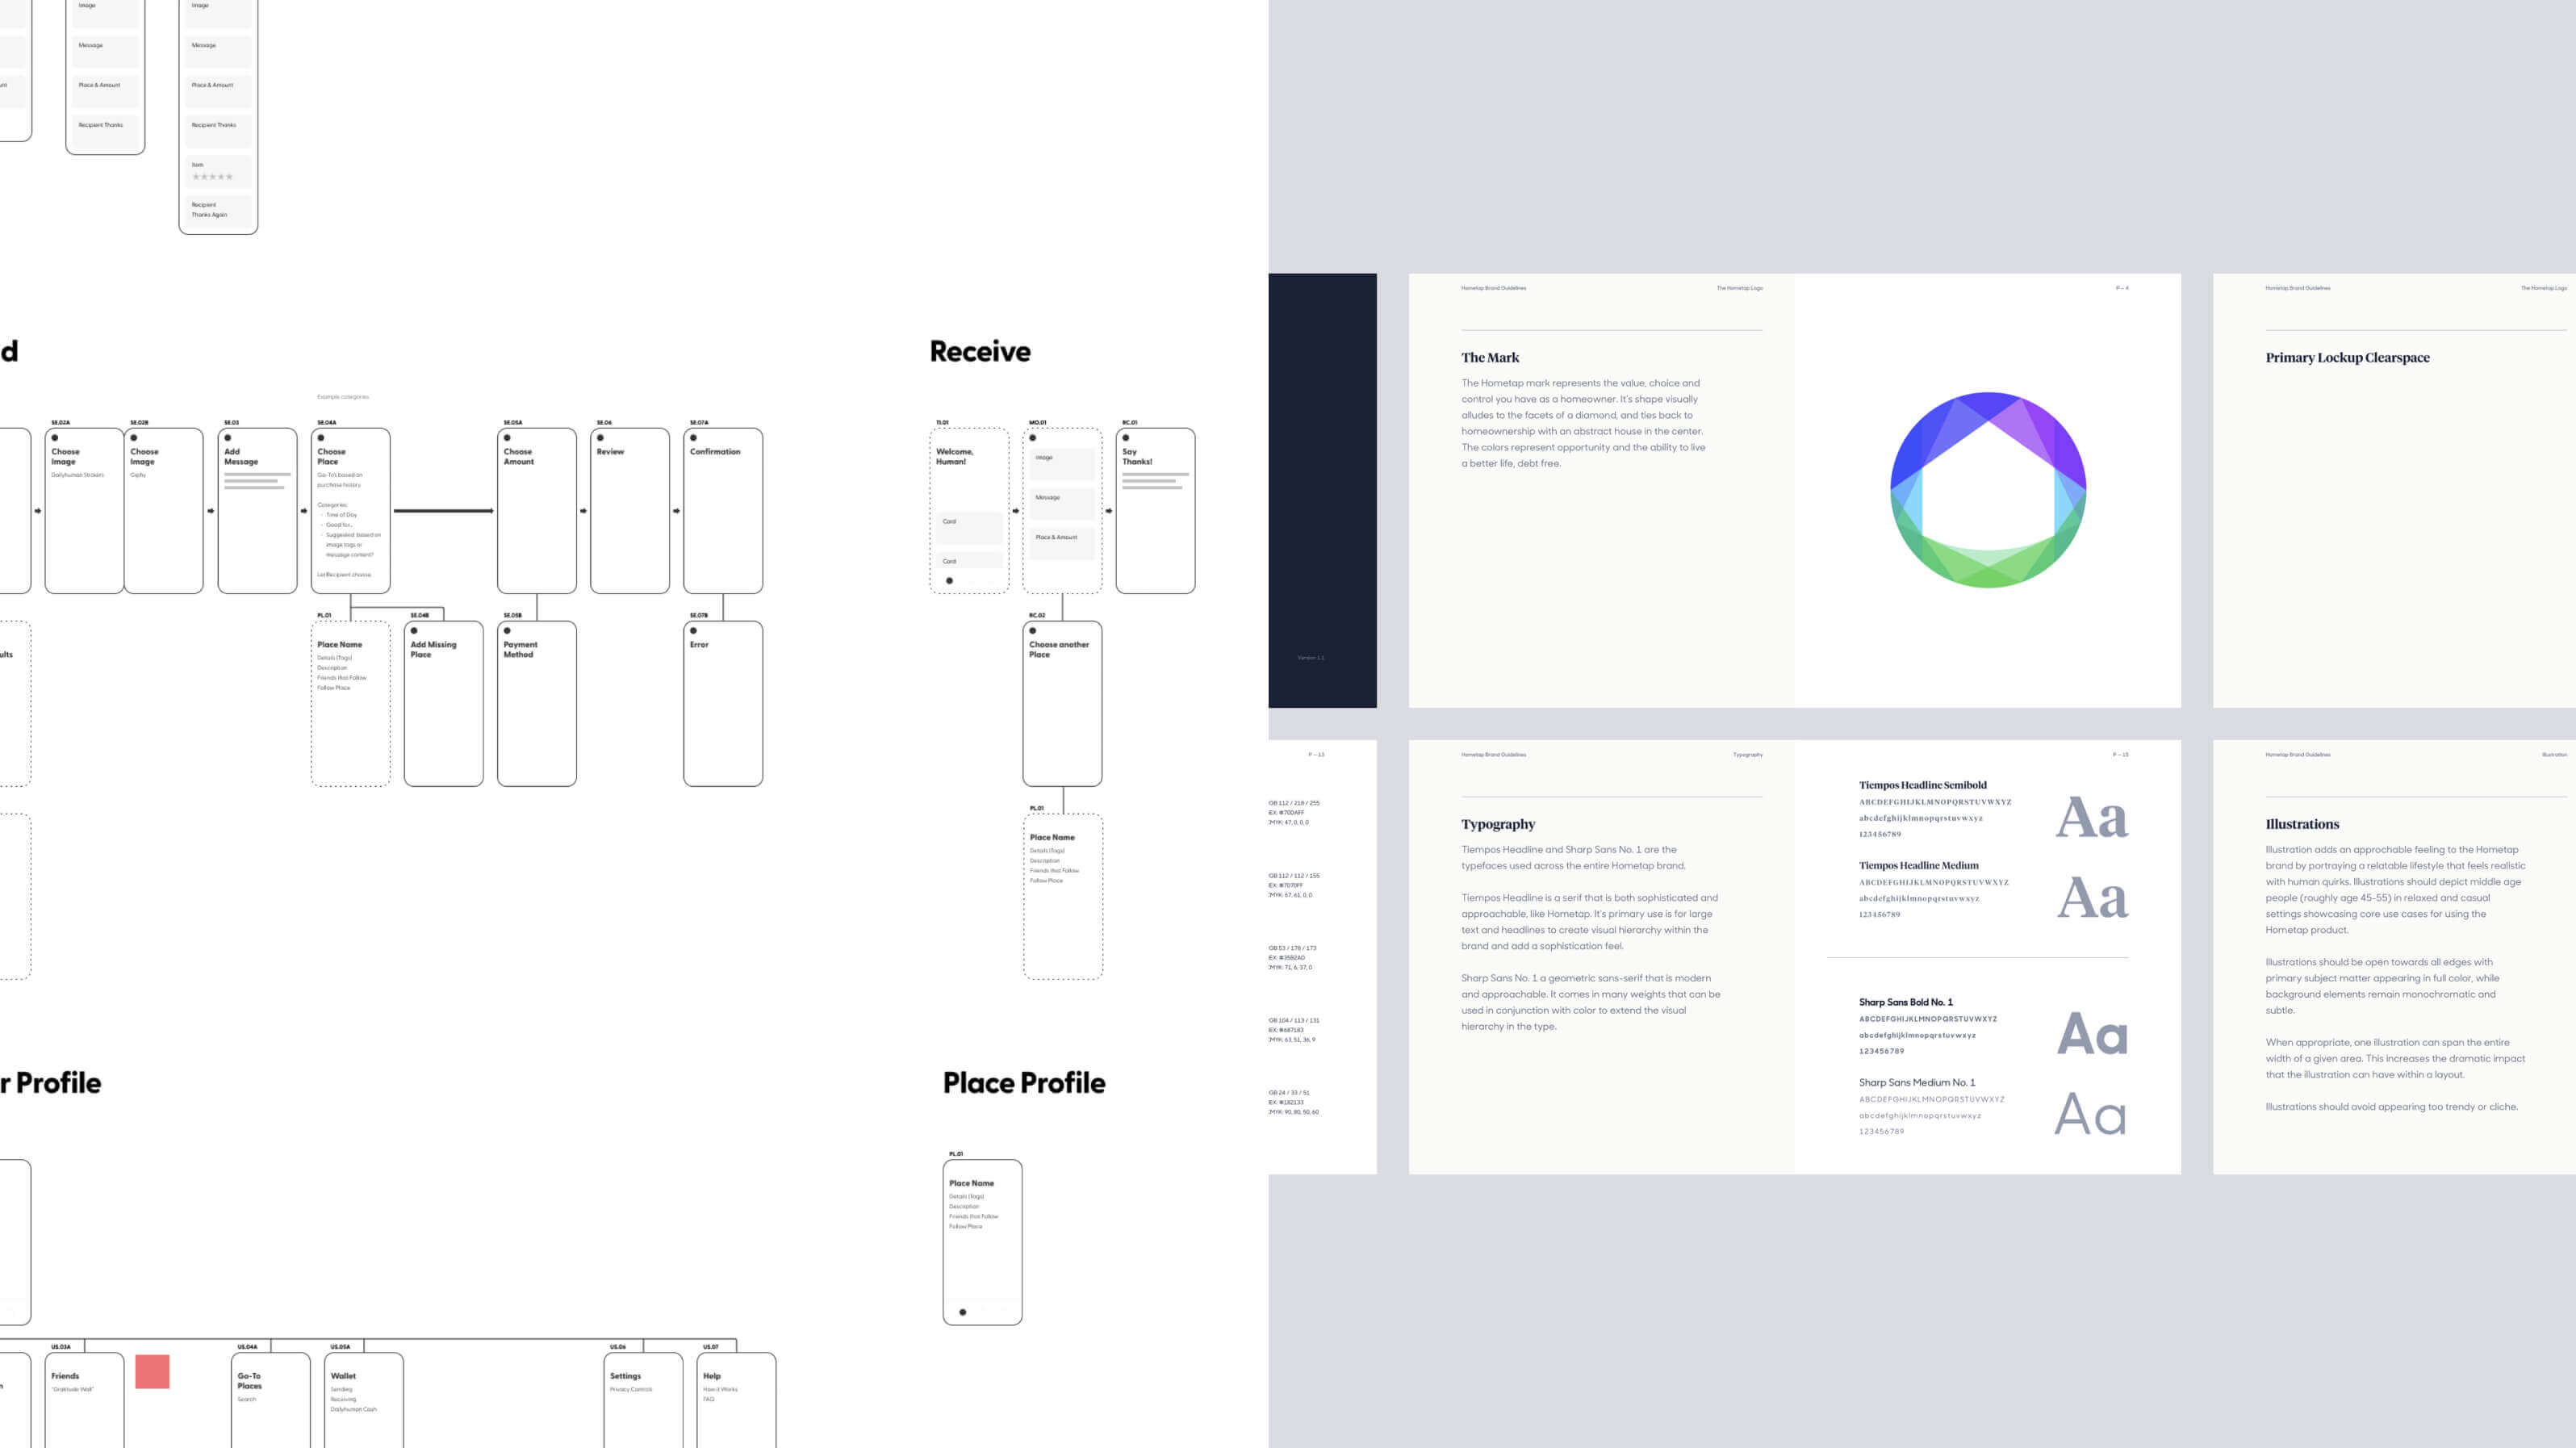 Schematic diagram of home equity startup mobile app user flows and screenshots of branding guidelines